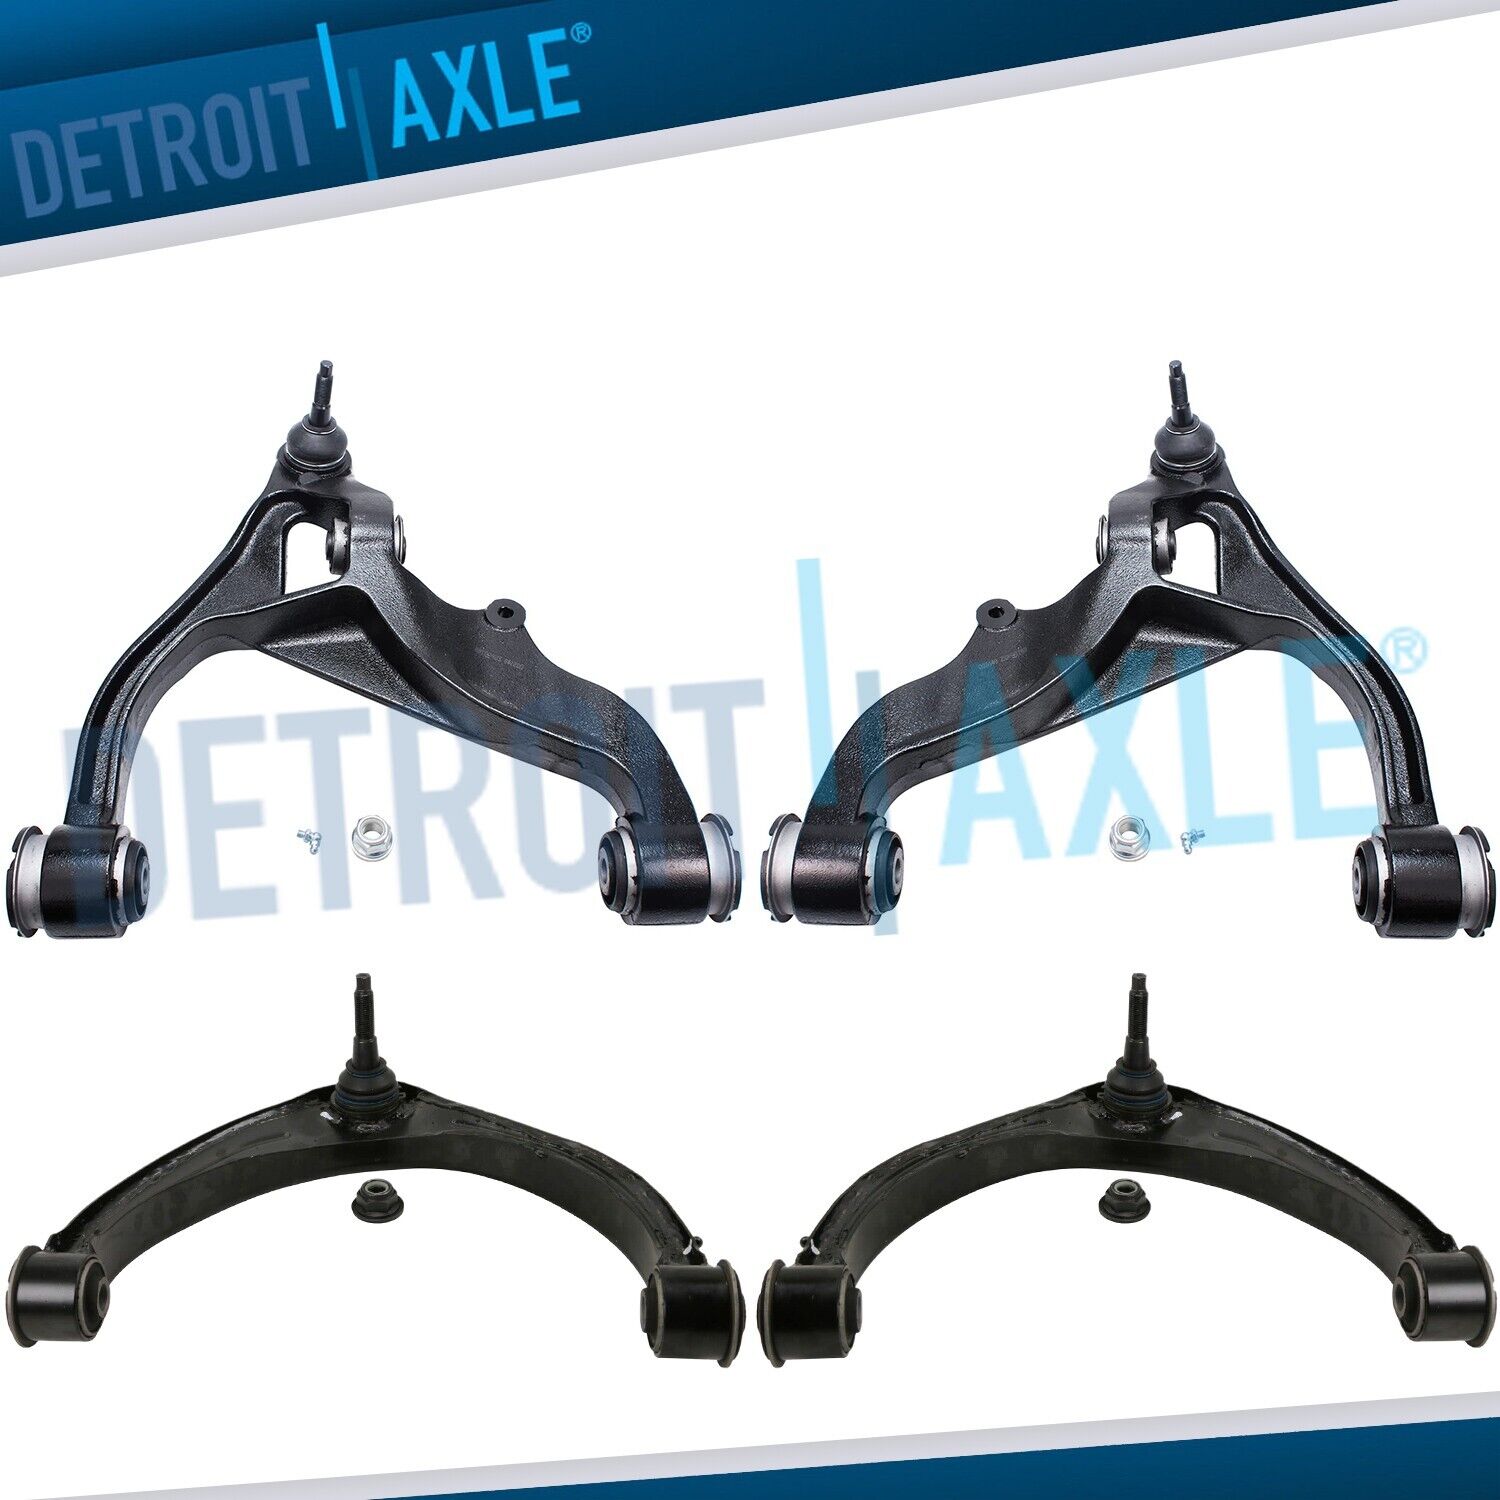 4WD 5-Lug Front Upper & Lower Control Arms w/Ball Joints for Dodge Ram 1500